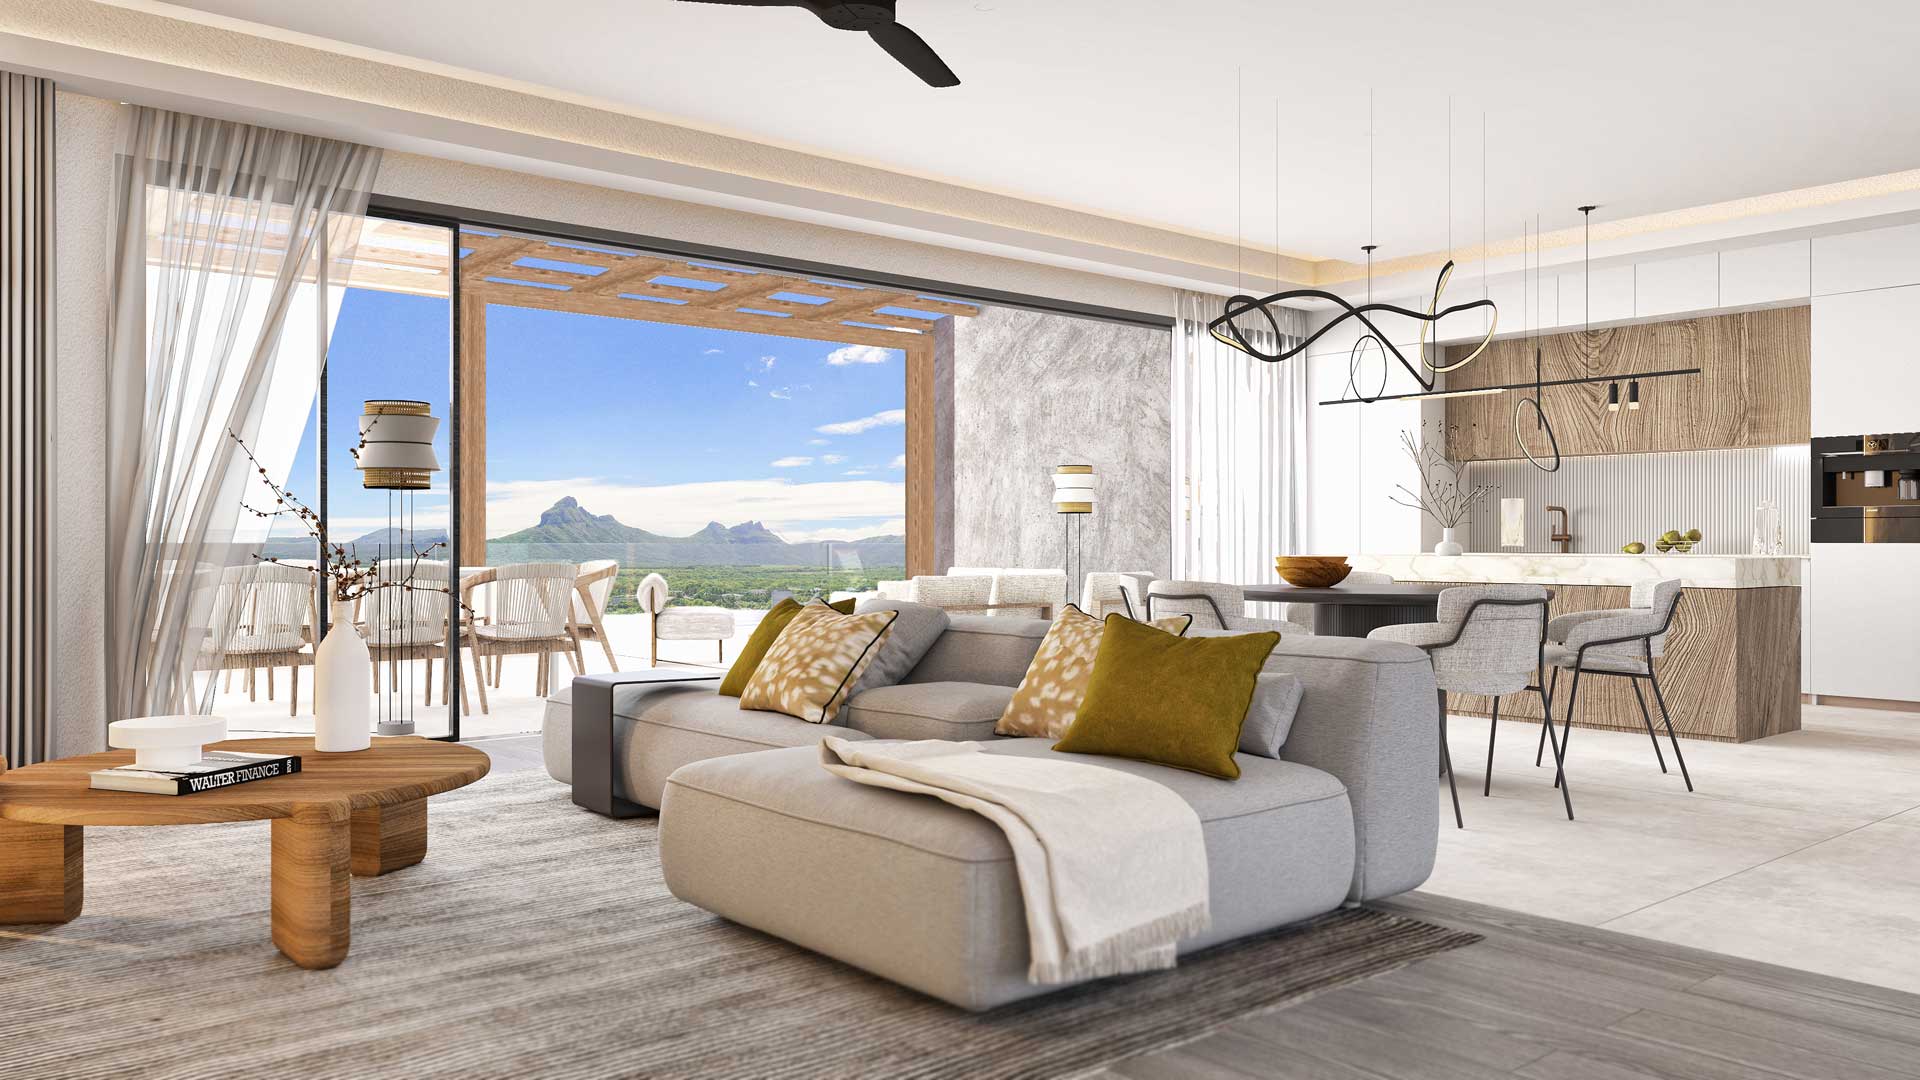 Luxurious interior of the apartment in the PDS AMARI BAY development in Tamarin, Mauritius by Westimmo Luxury Real Estate Mauritius